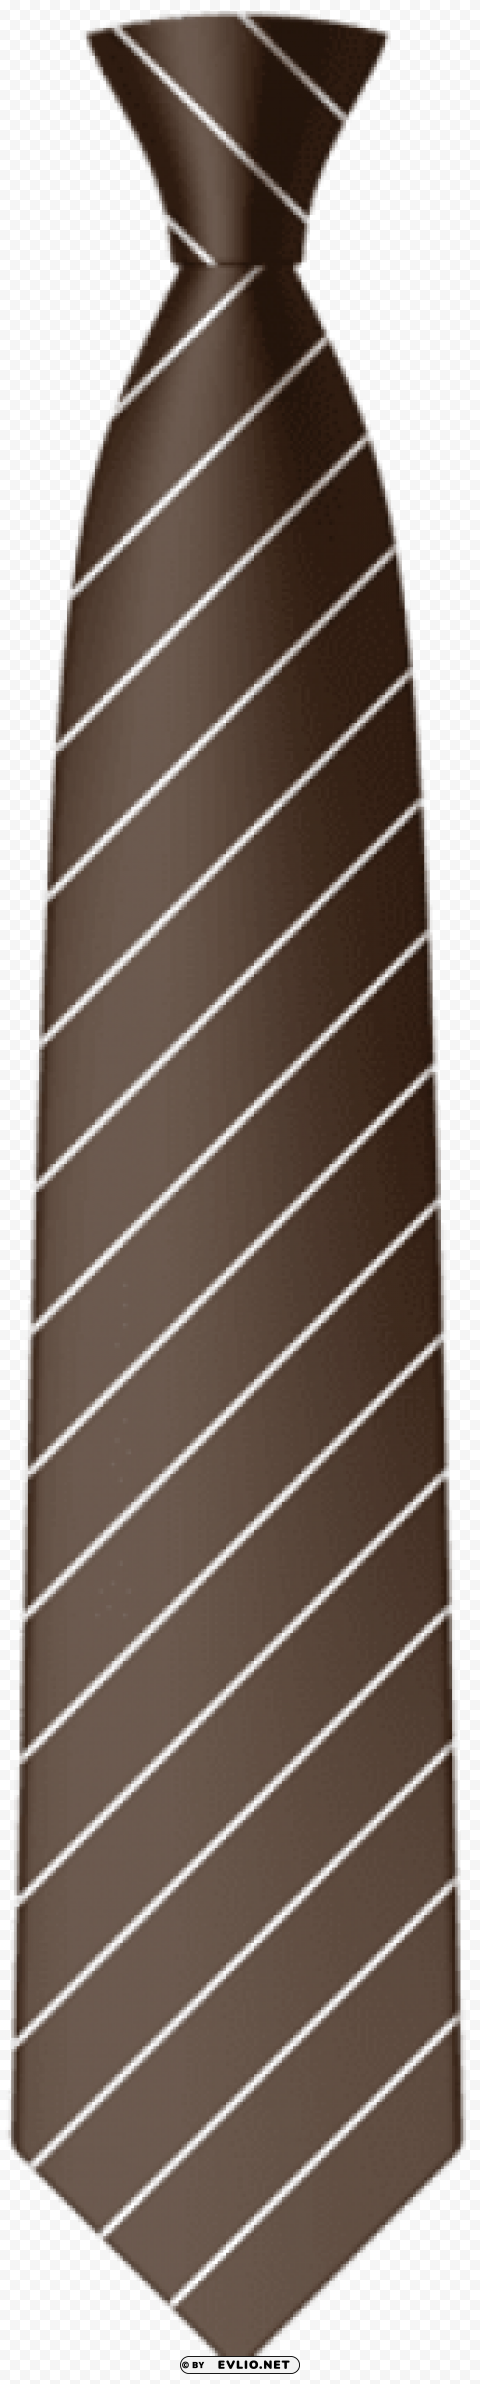 brown tie PNG Image with Clear Background Isolated